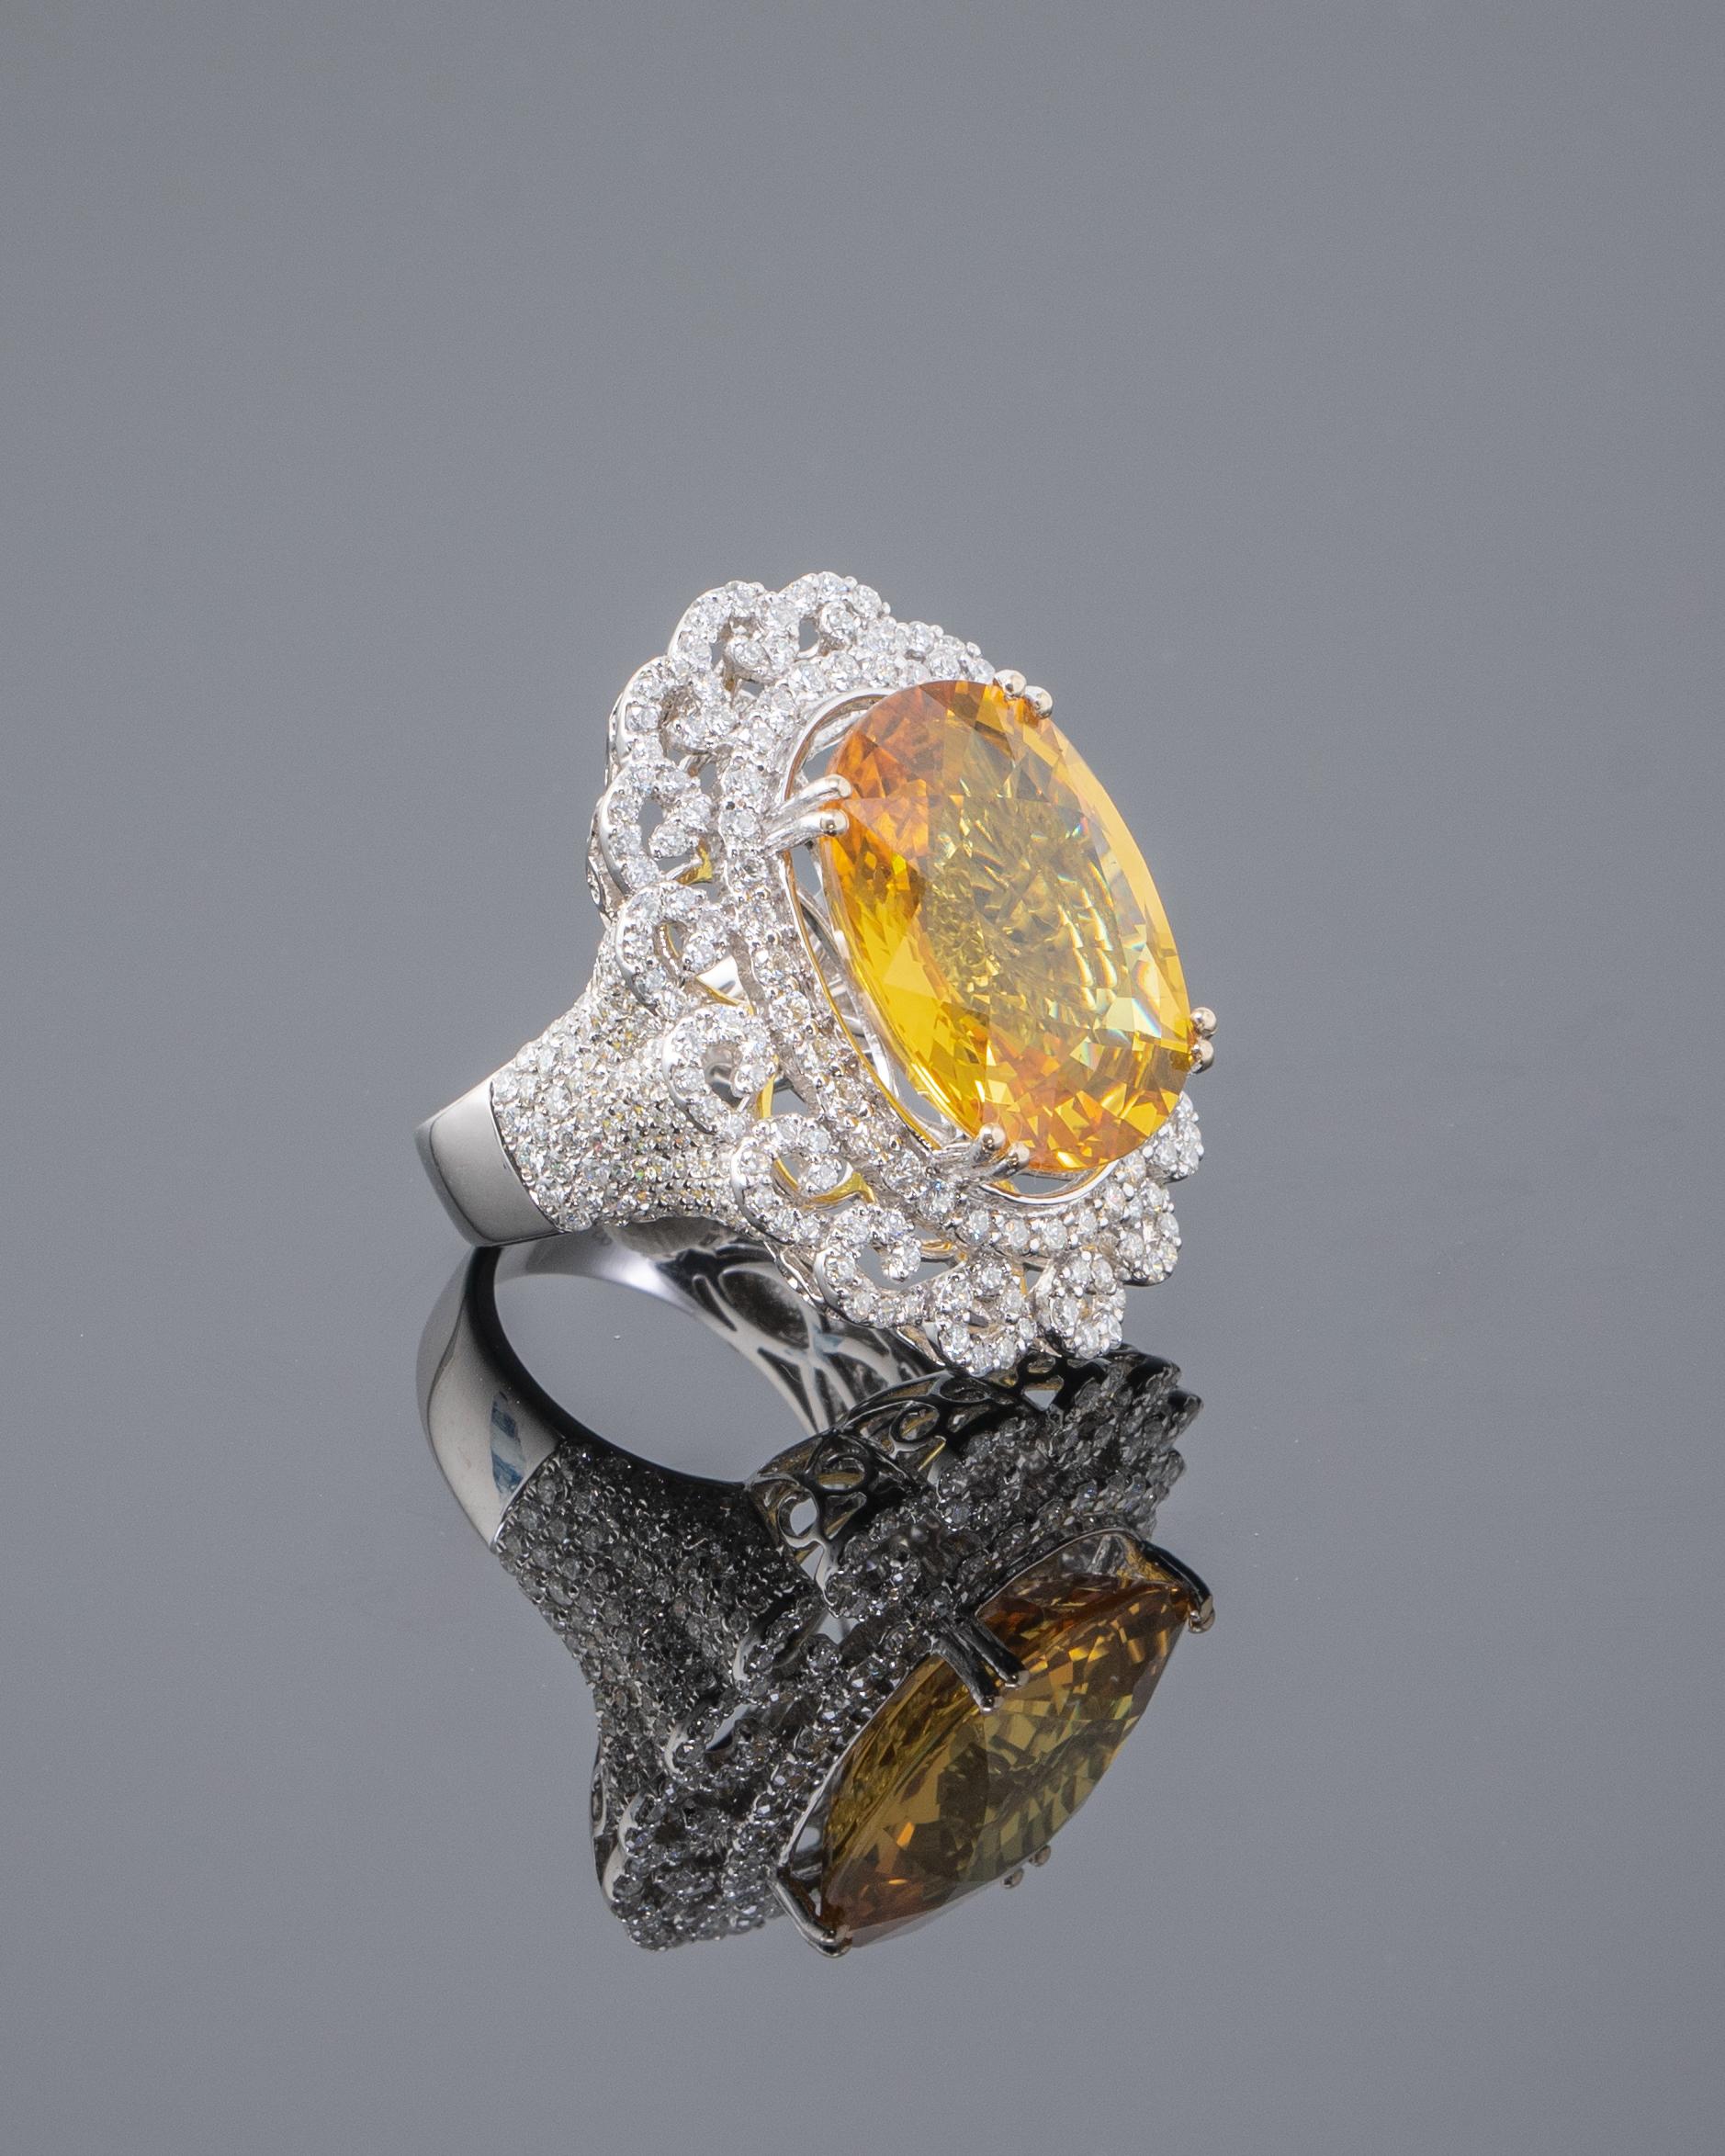 Make a statement with this gorgeous 23.21 carat Yellow Sapphire and 3.29 carat White Diamond cocktail ring, set in 12.80 grams of solid 18K White Gold. The sapphire is eye clean, no inlcusions and has great lustre and a beautiful yellow colour. It